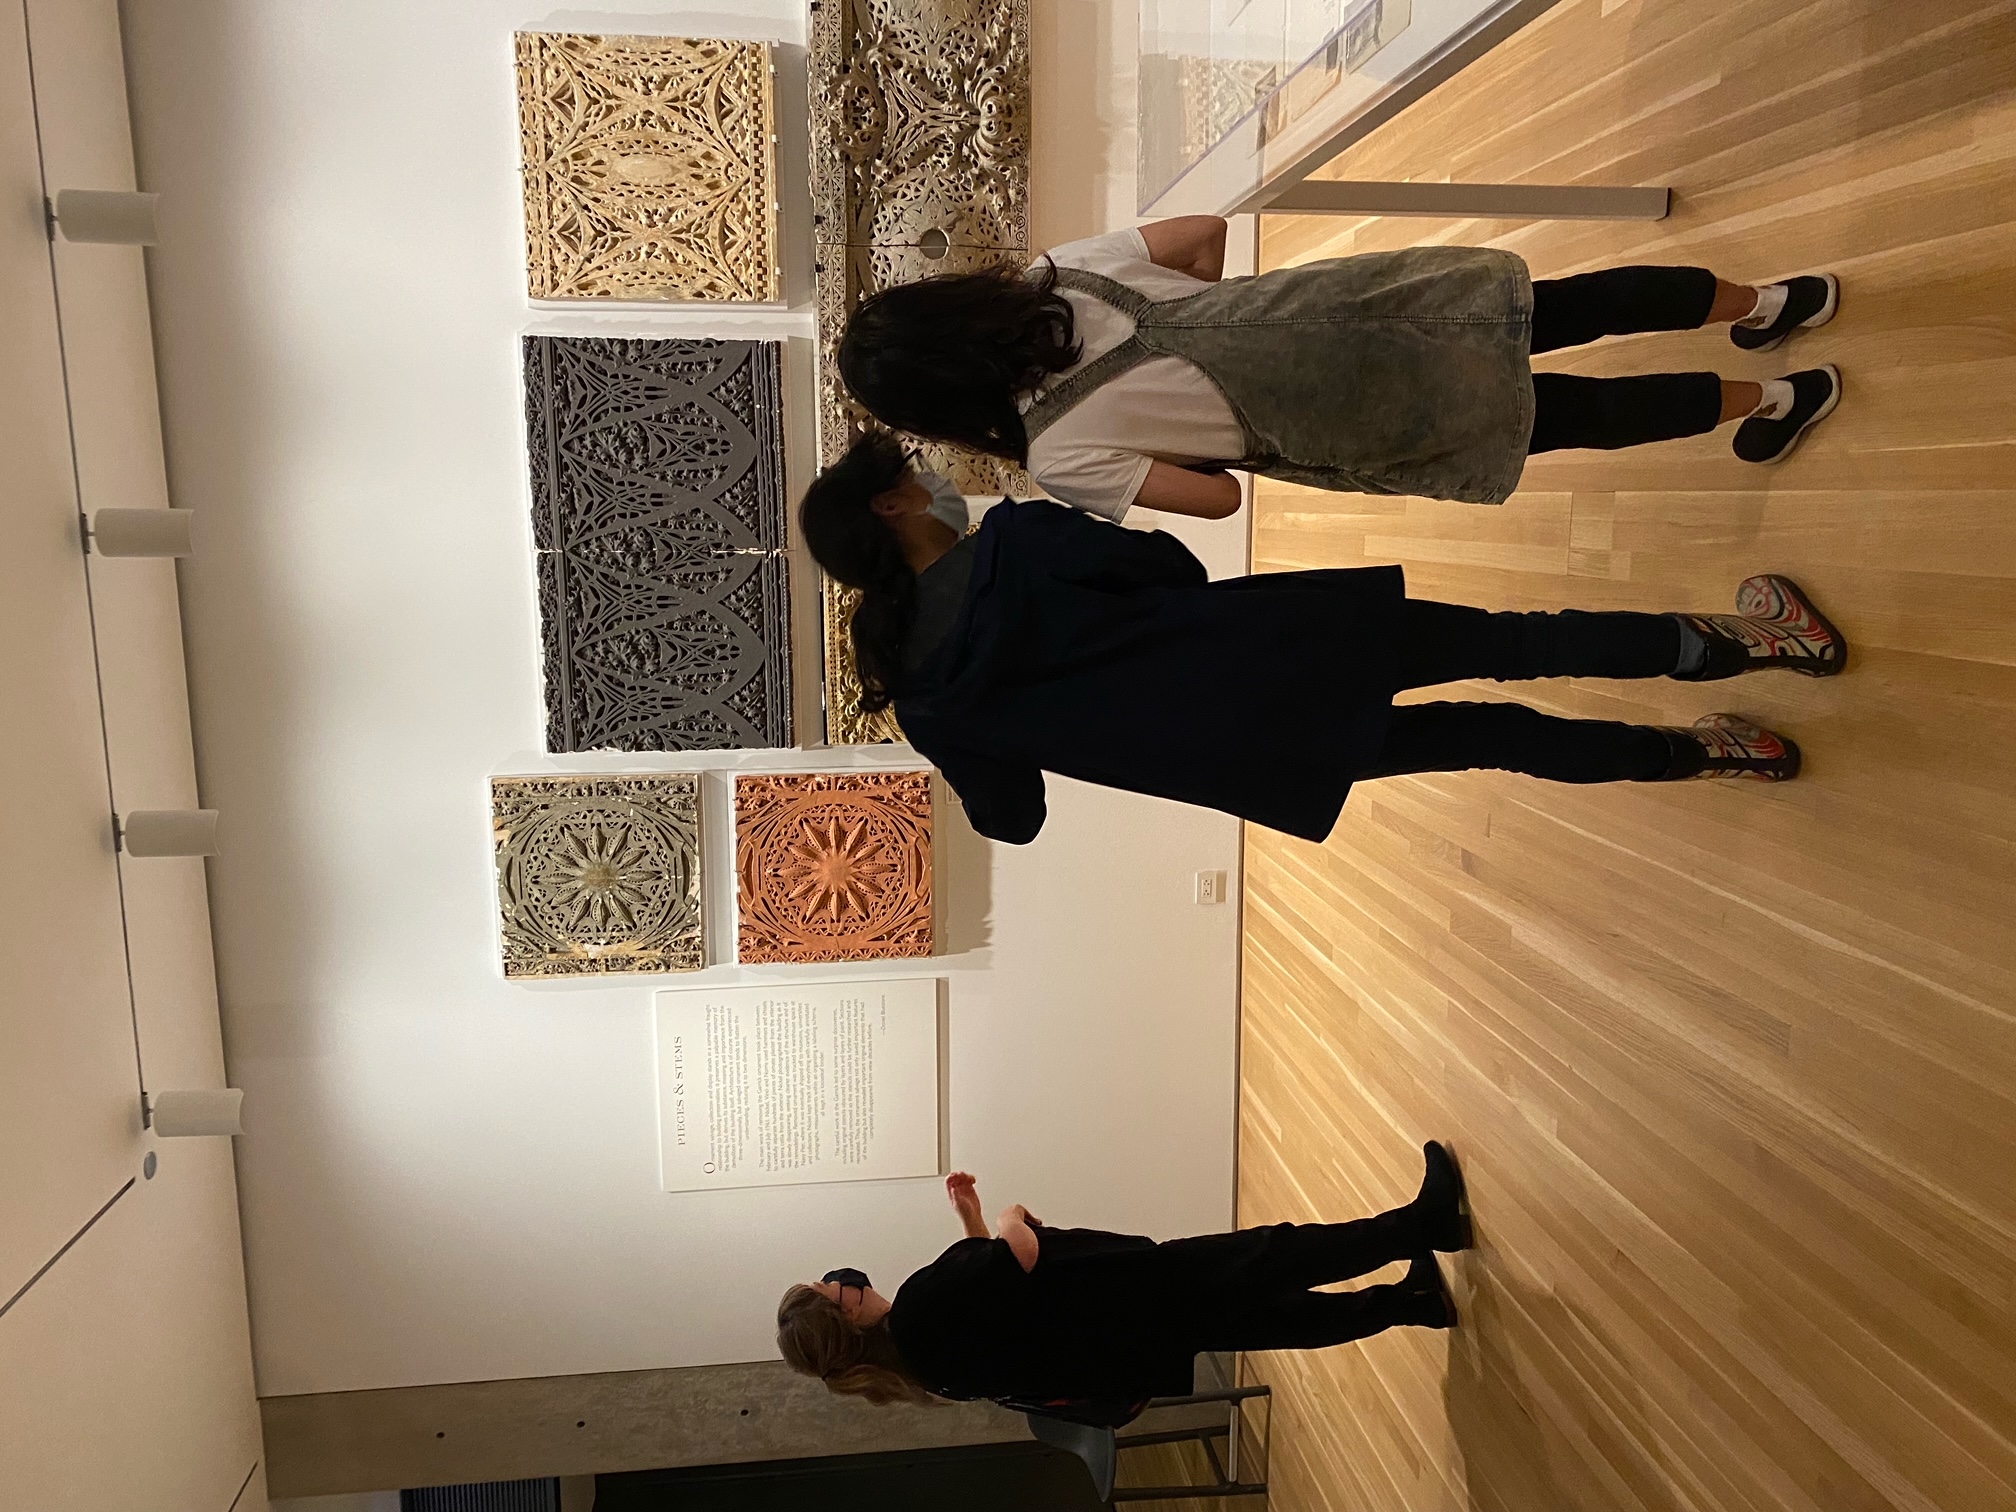 Three people examining art pieces on a white gallery wall that depict spiraling and floral designs